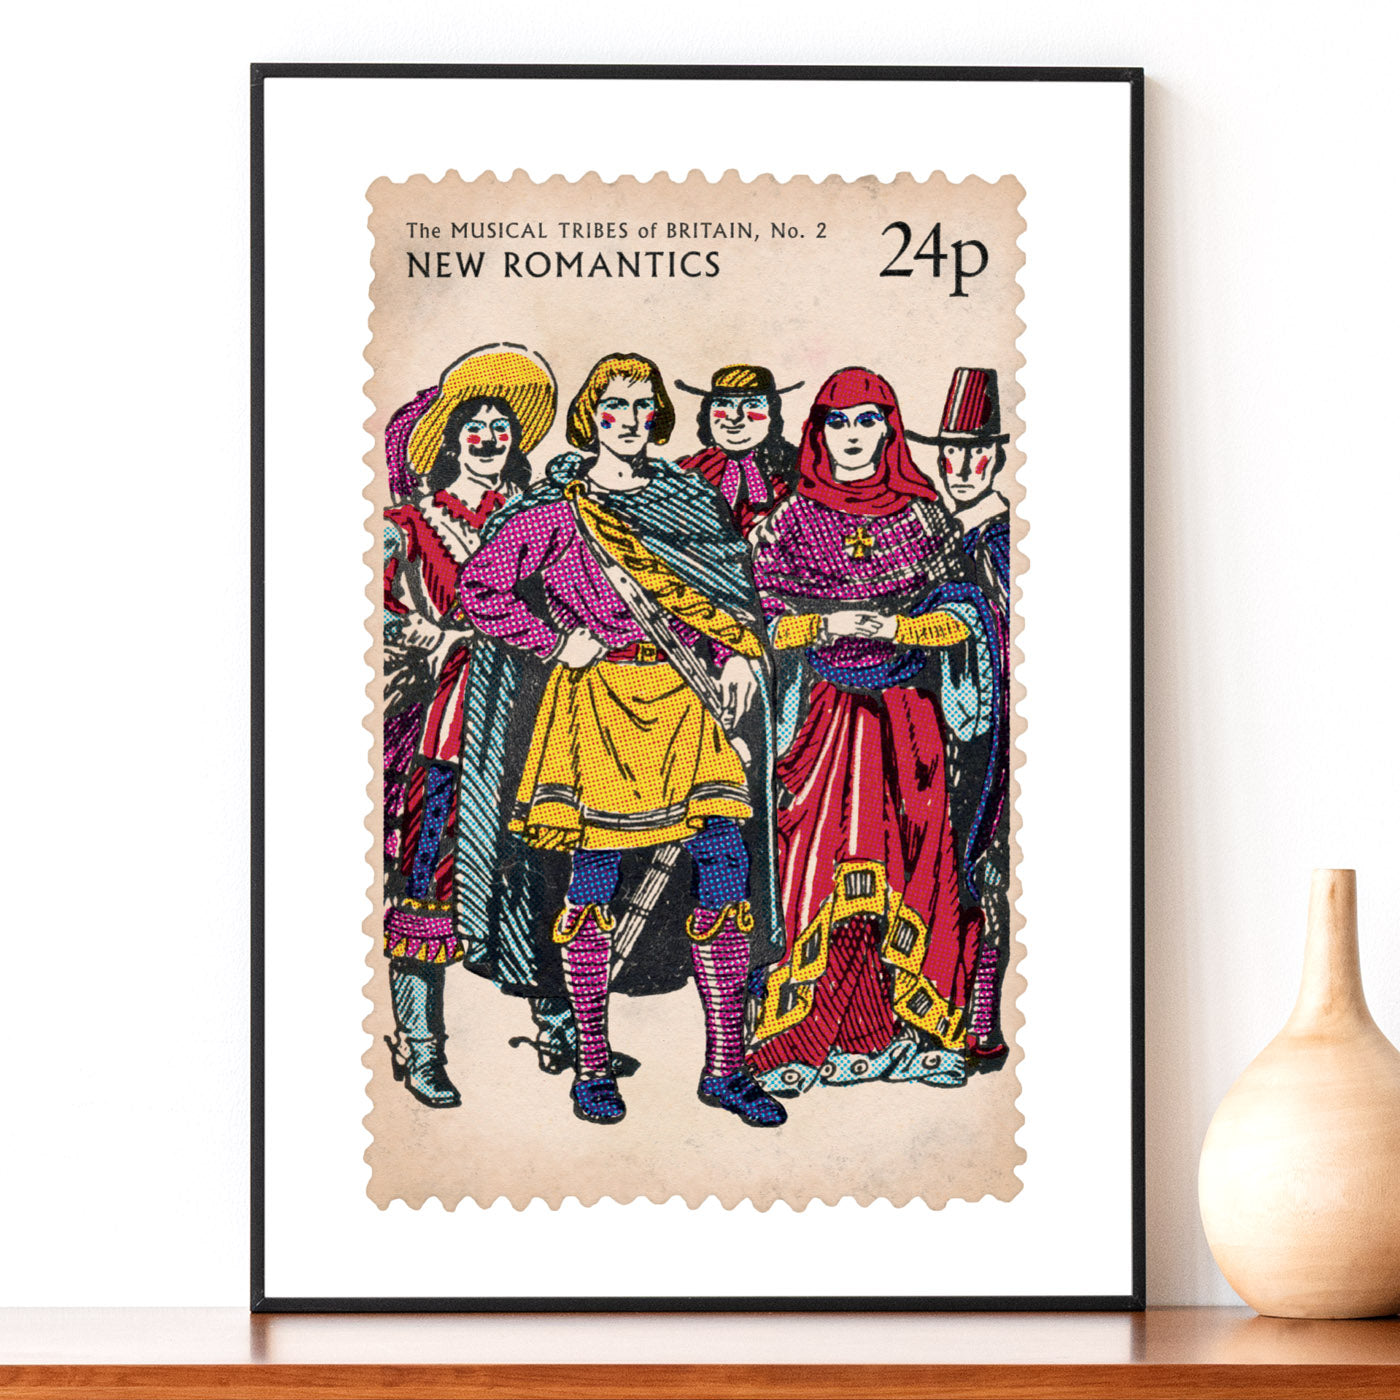 'New Romantics' print. From 'The Musical Tribes Of Britain', a humorous commemorative postage stamp print series